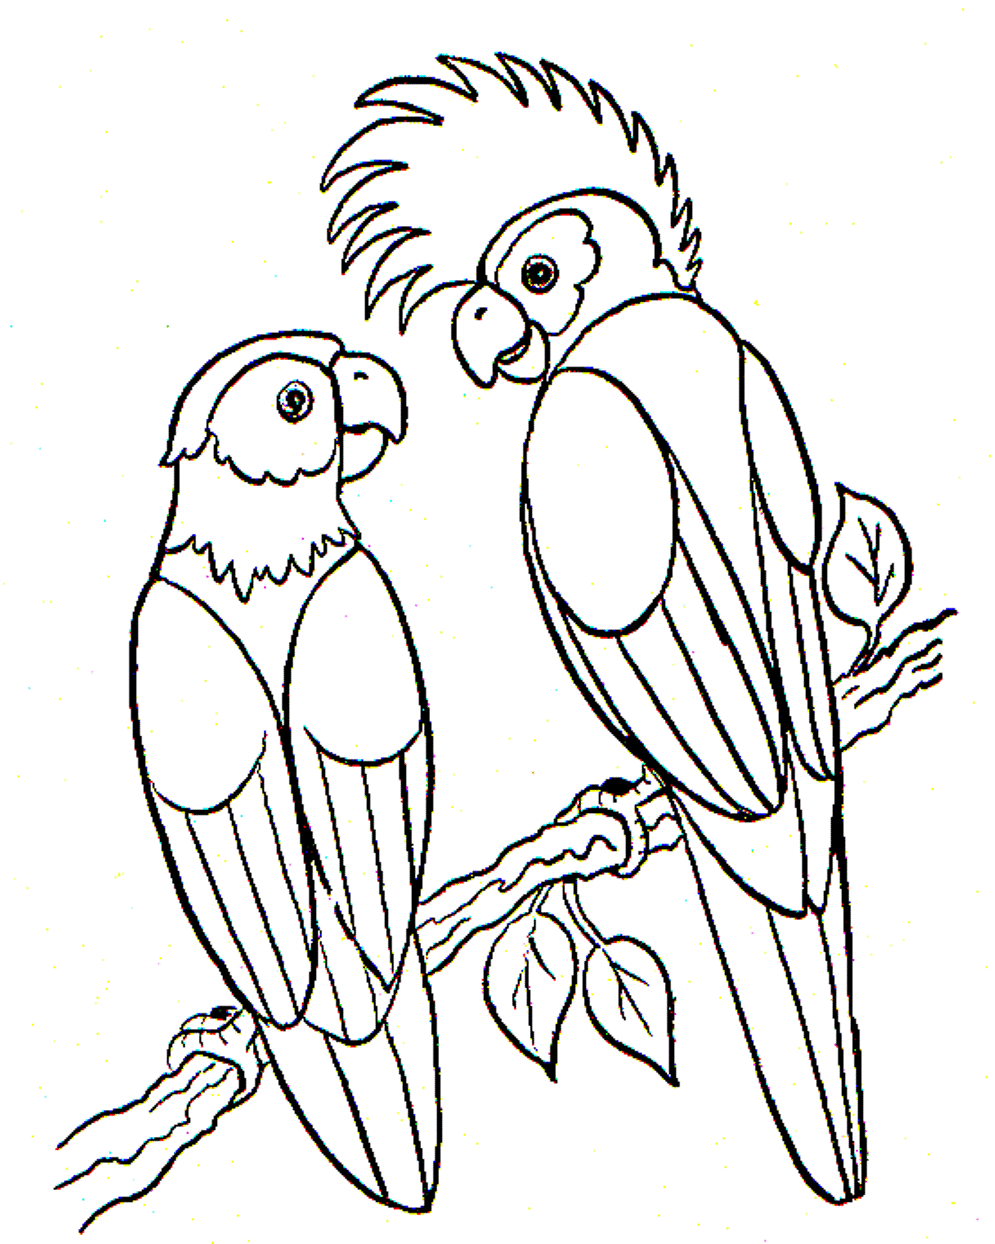 Bird Coloring Page Parrots | Animal Coloring pages of ...